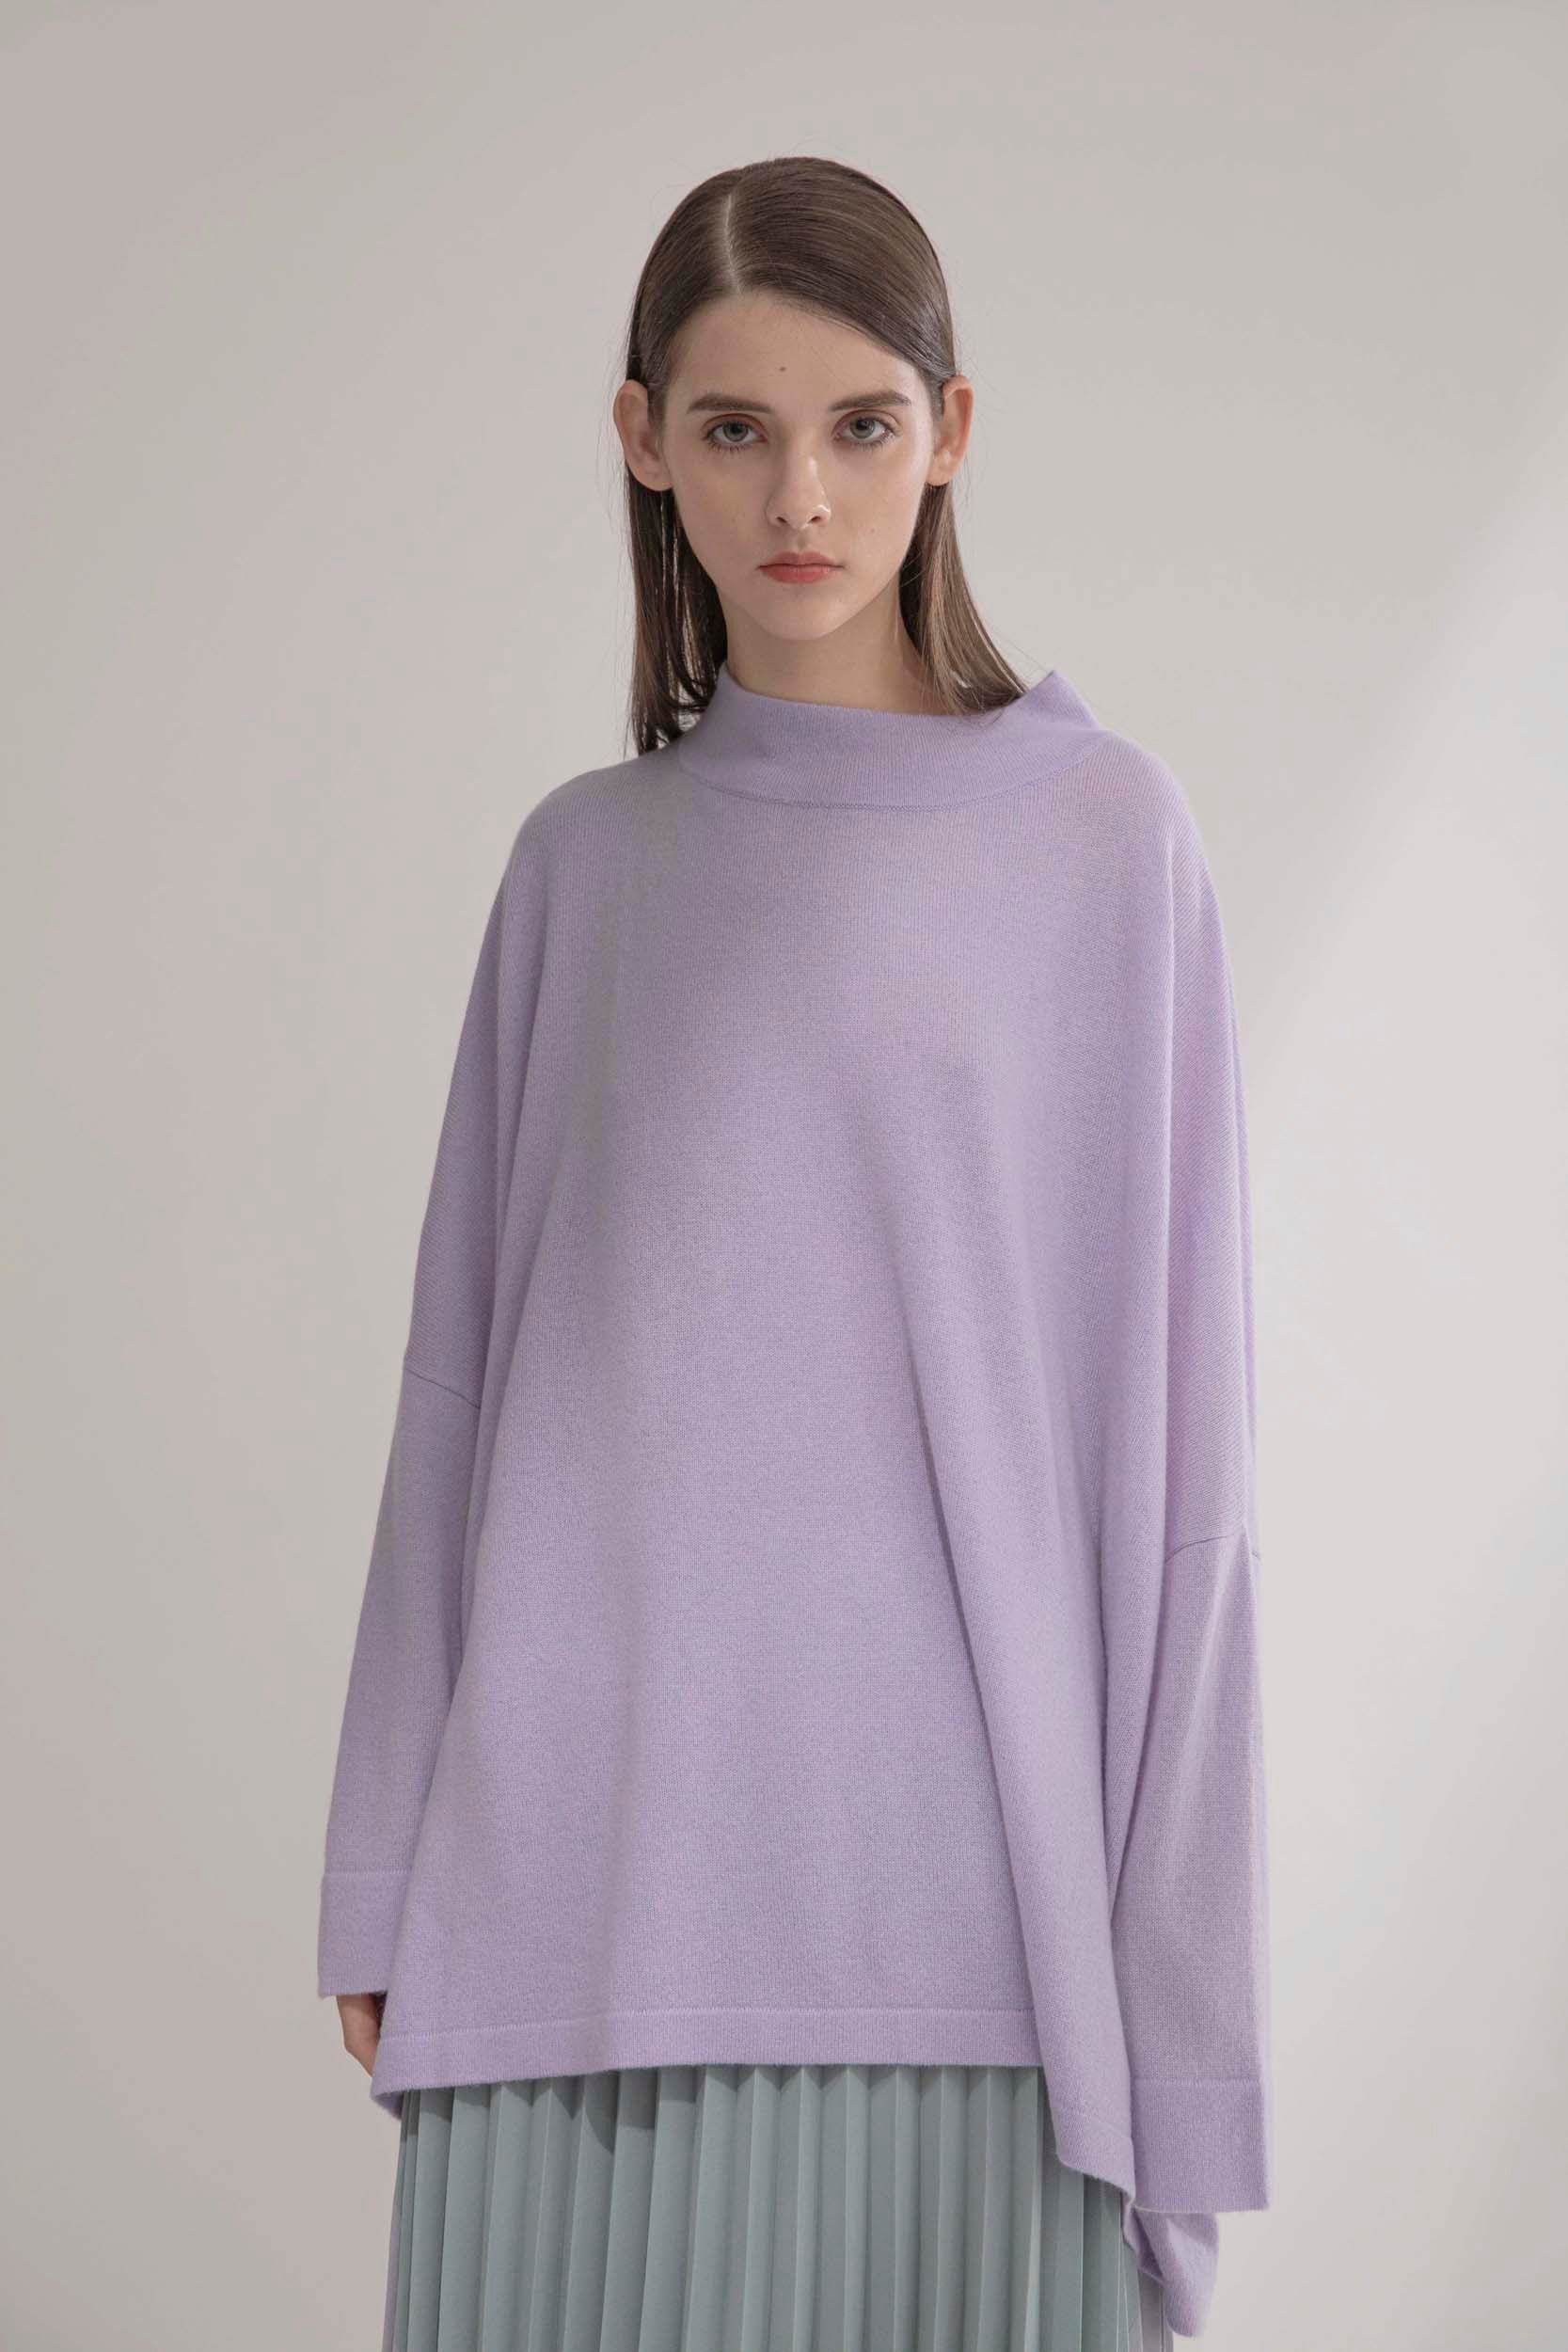 NORAH SUE Cashmere Square Cut Long Sleeves Top